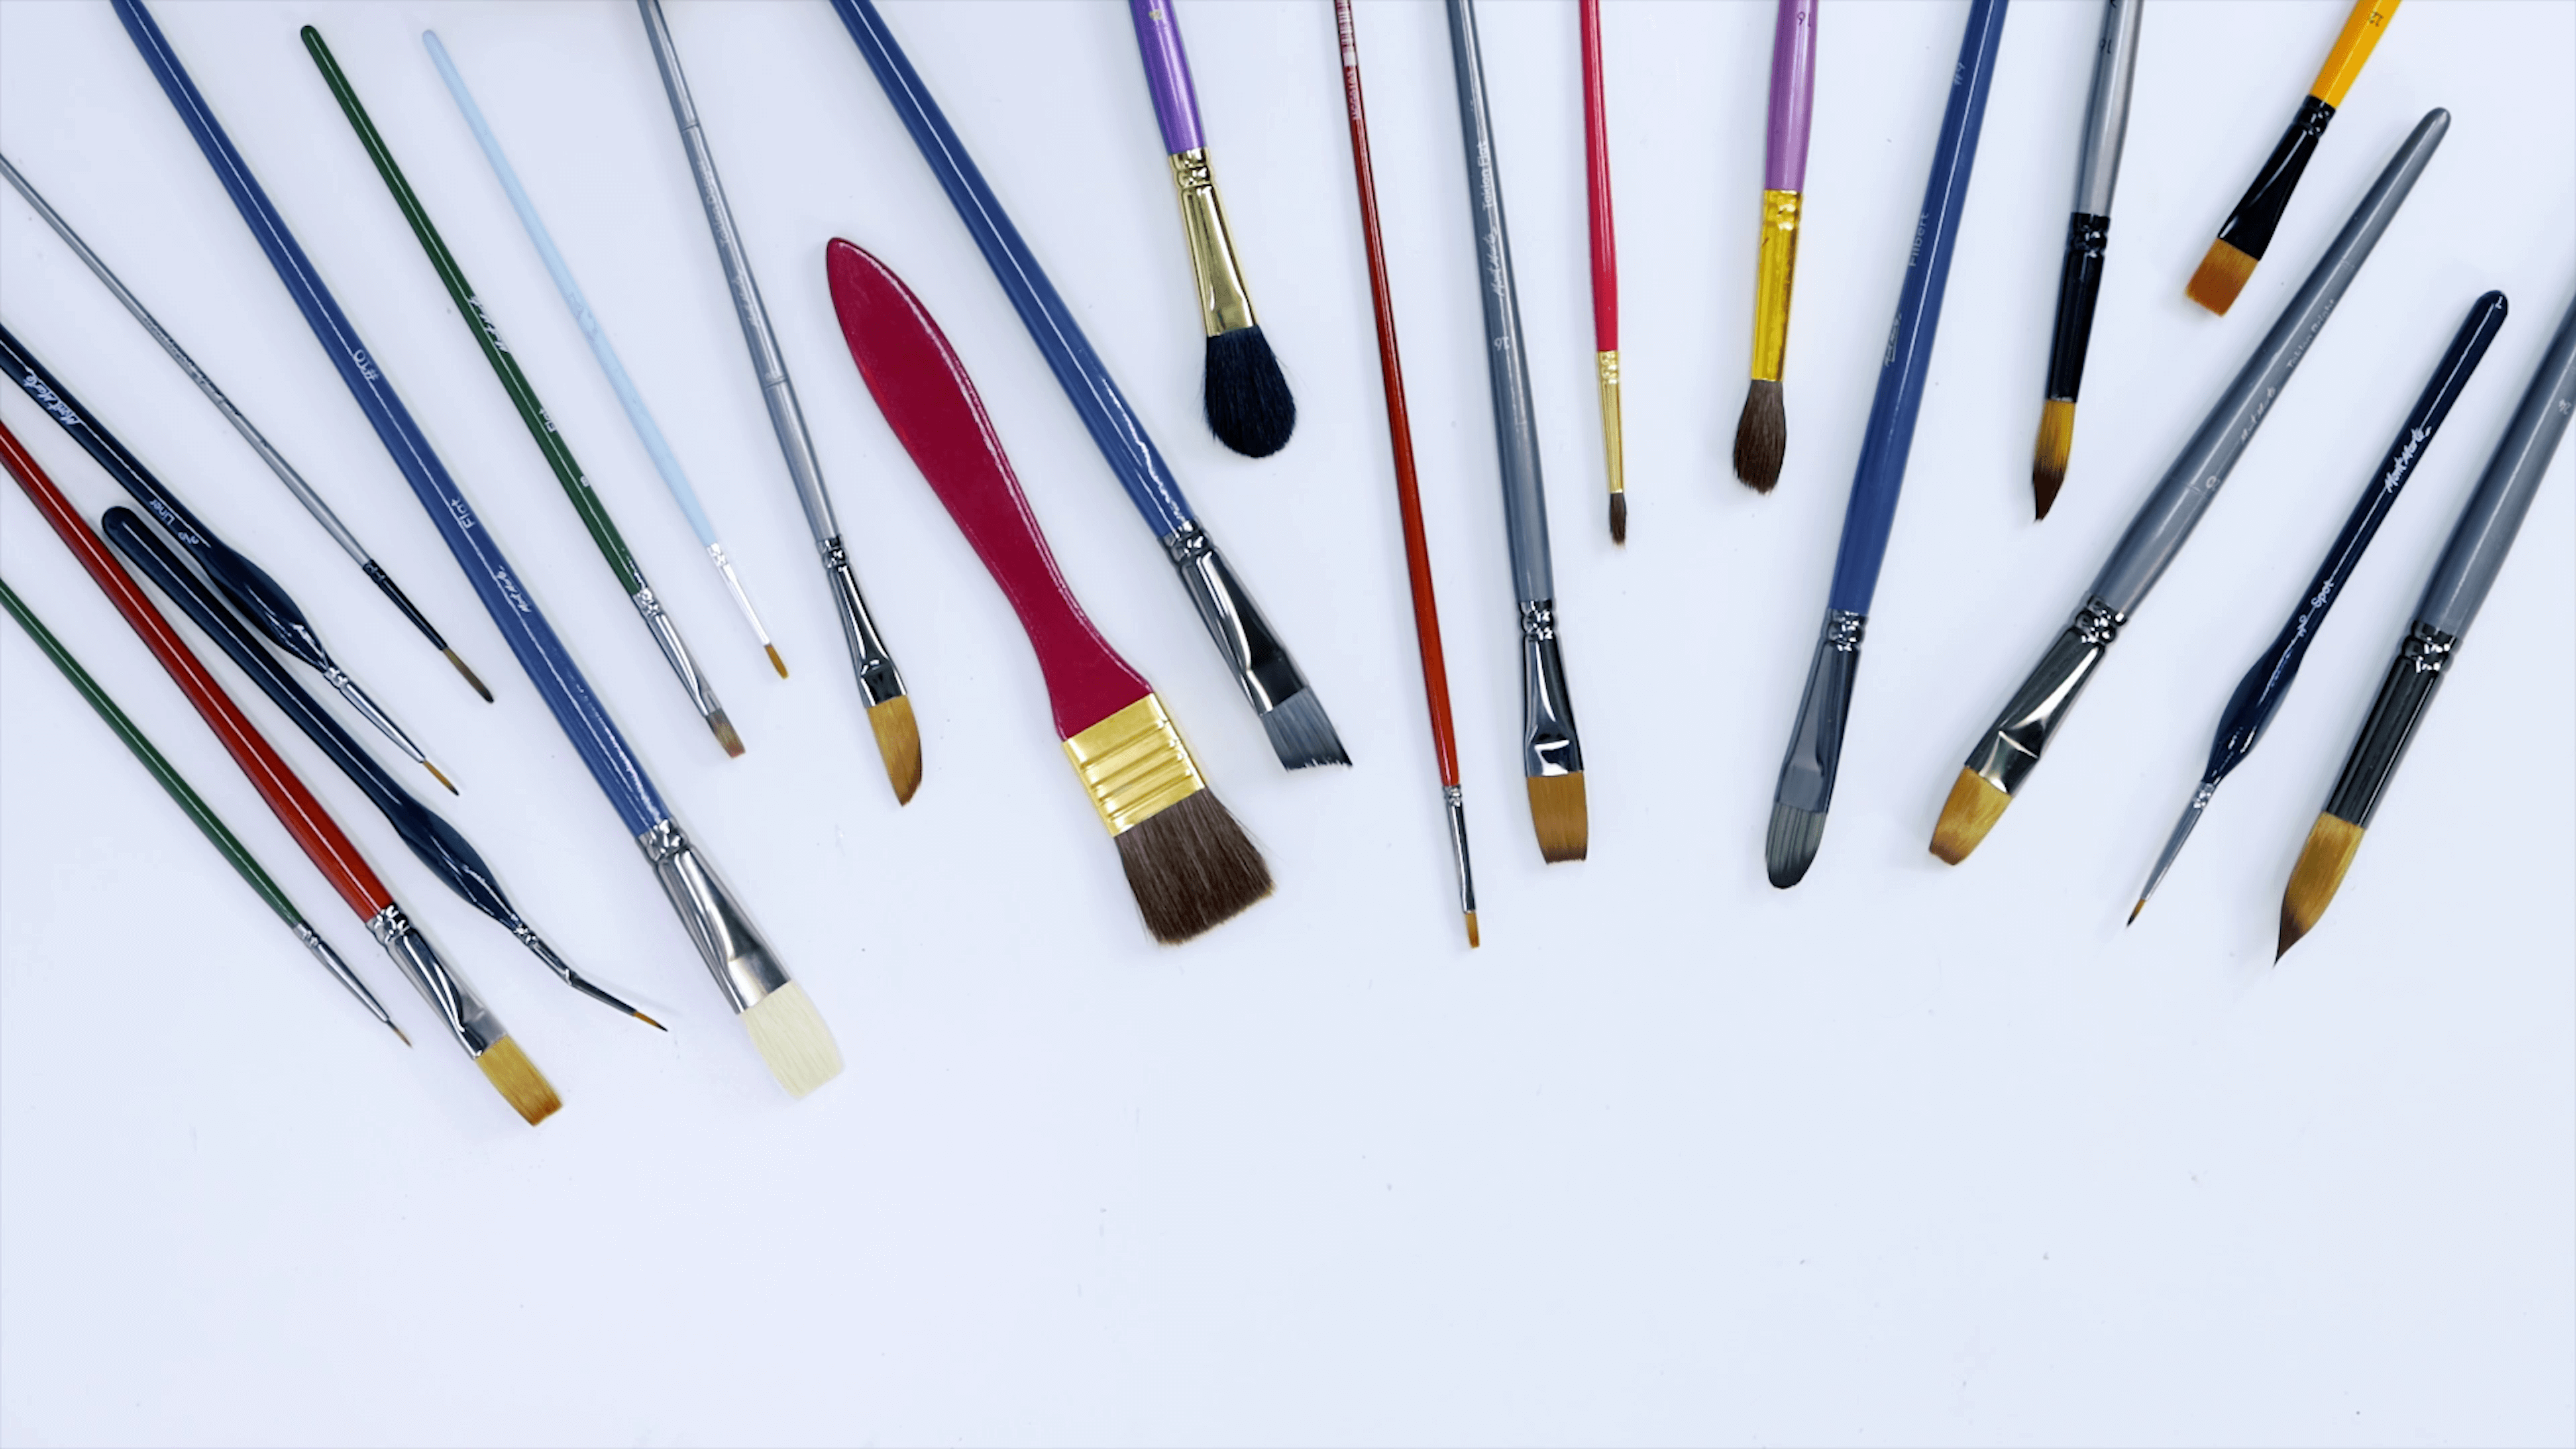 https://cdn.shopify.com/s/files/1/0603/3745/5243/files/Range_of_different_Mont_Marte_acrylic_paint_brushes_of_different_sizes_and_lengths.png?v=1677554038